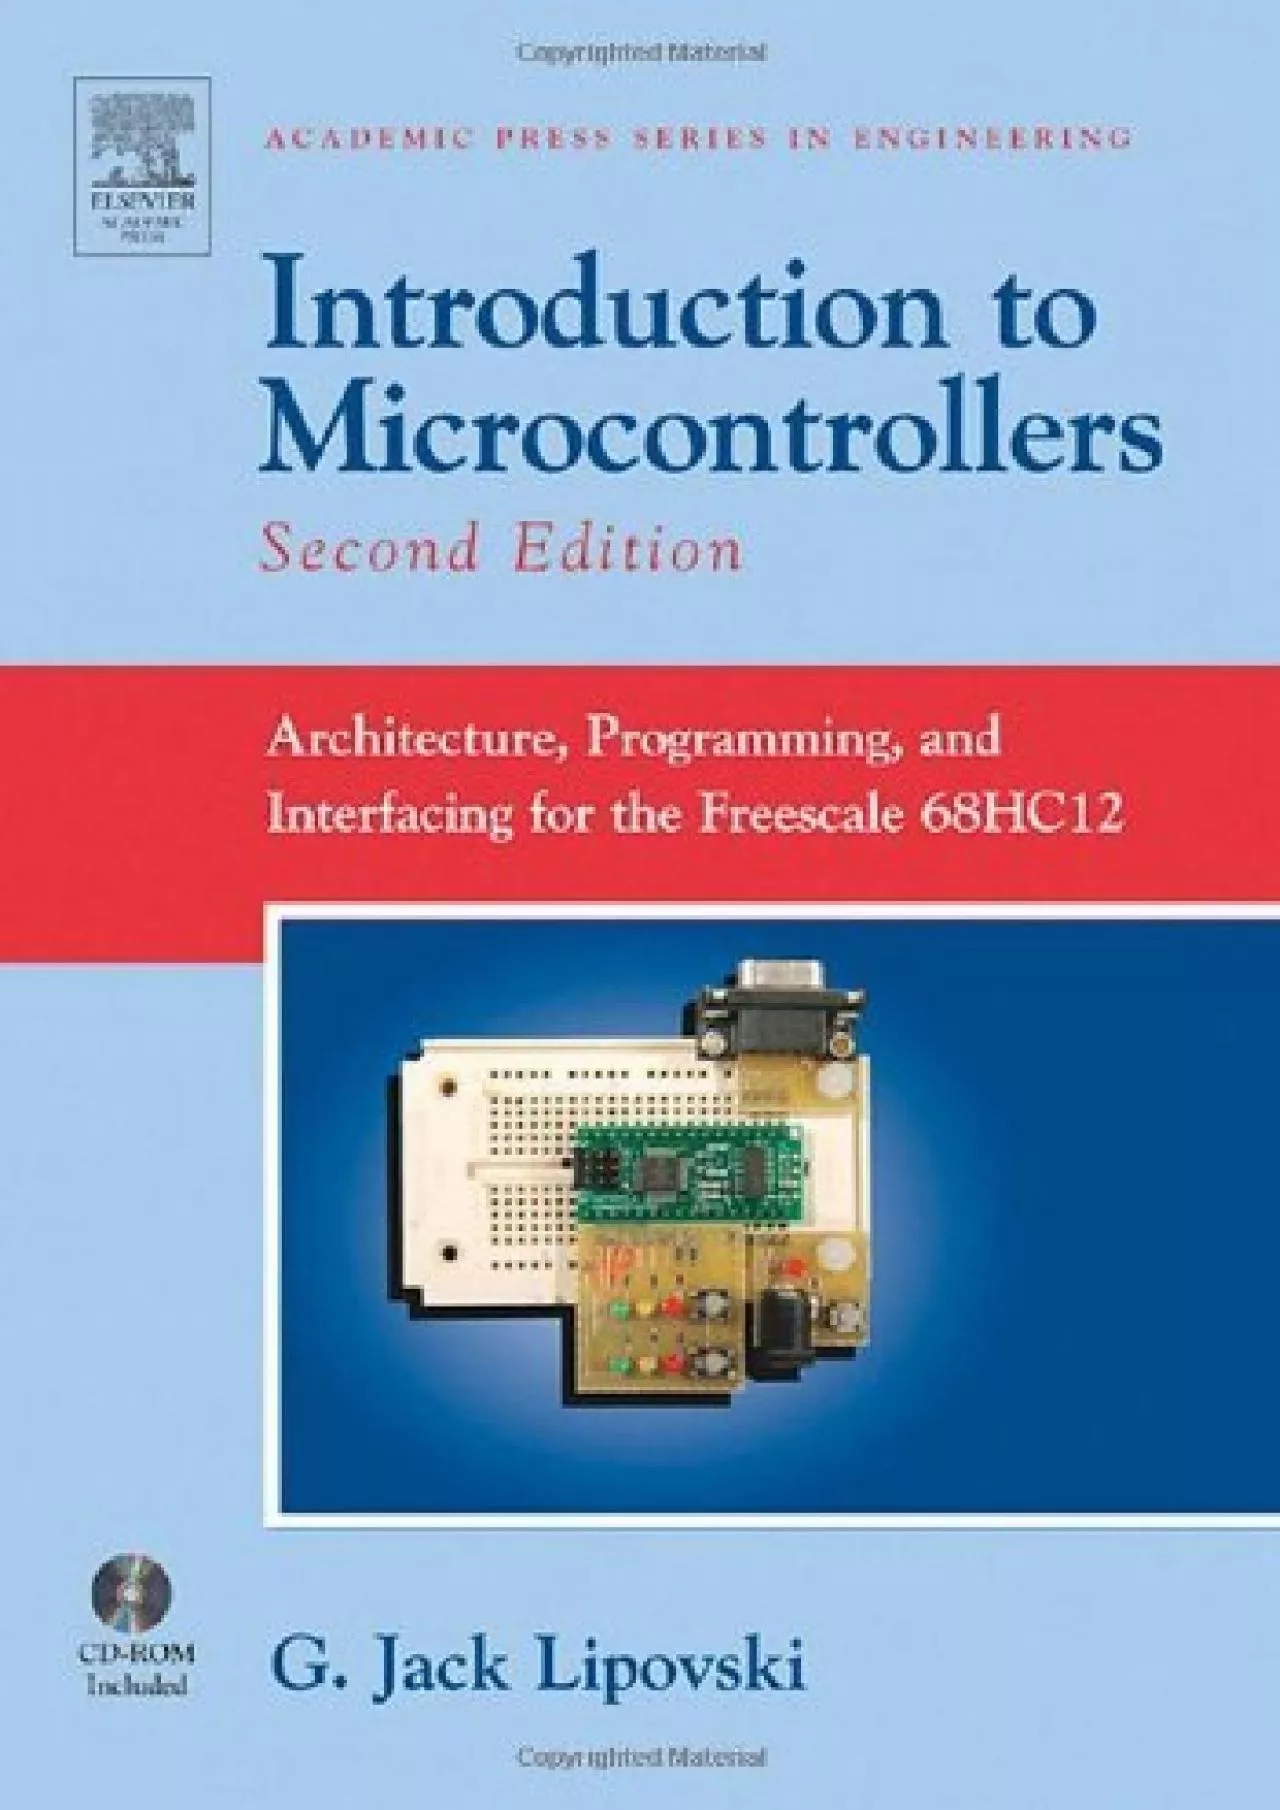 [FREE]-Introduction to Microcontrollers: Architecture, Programming, and Interfacing for